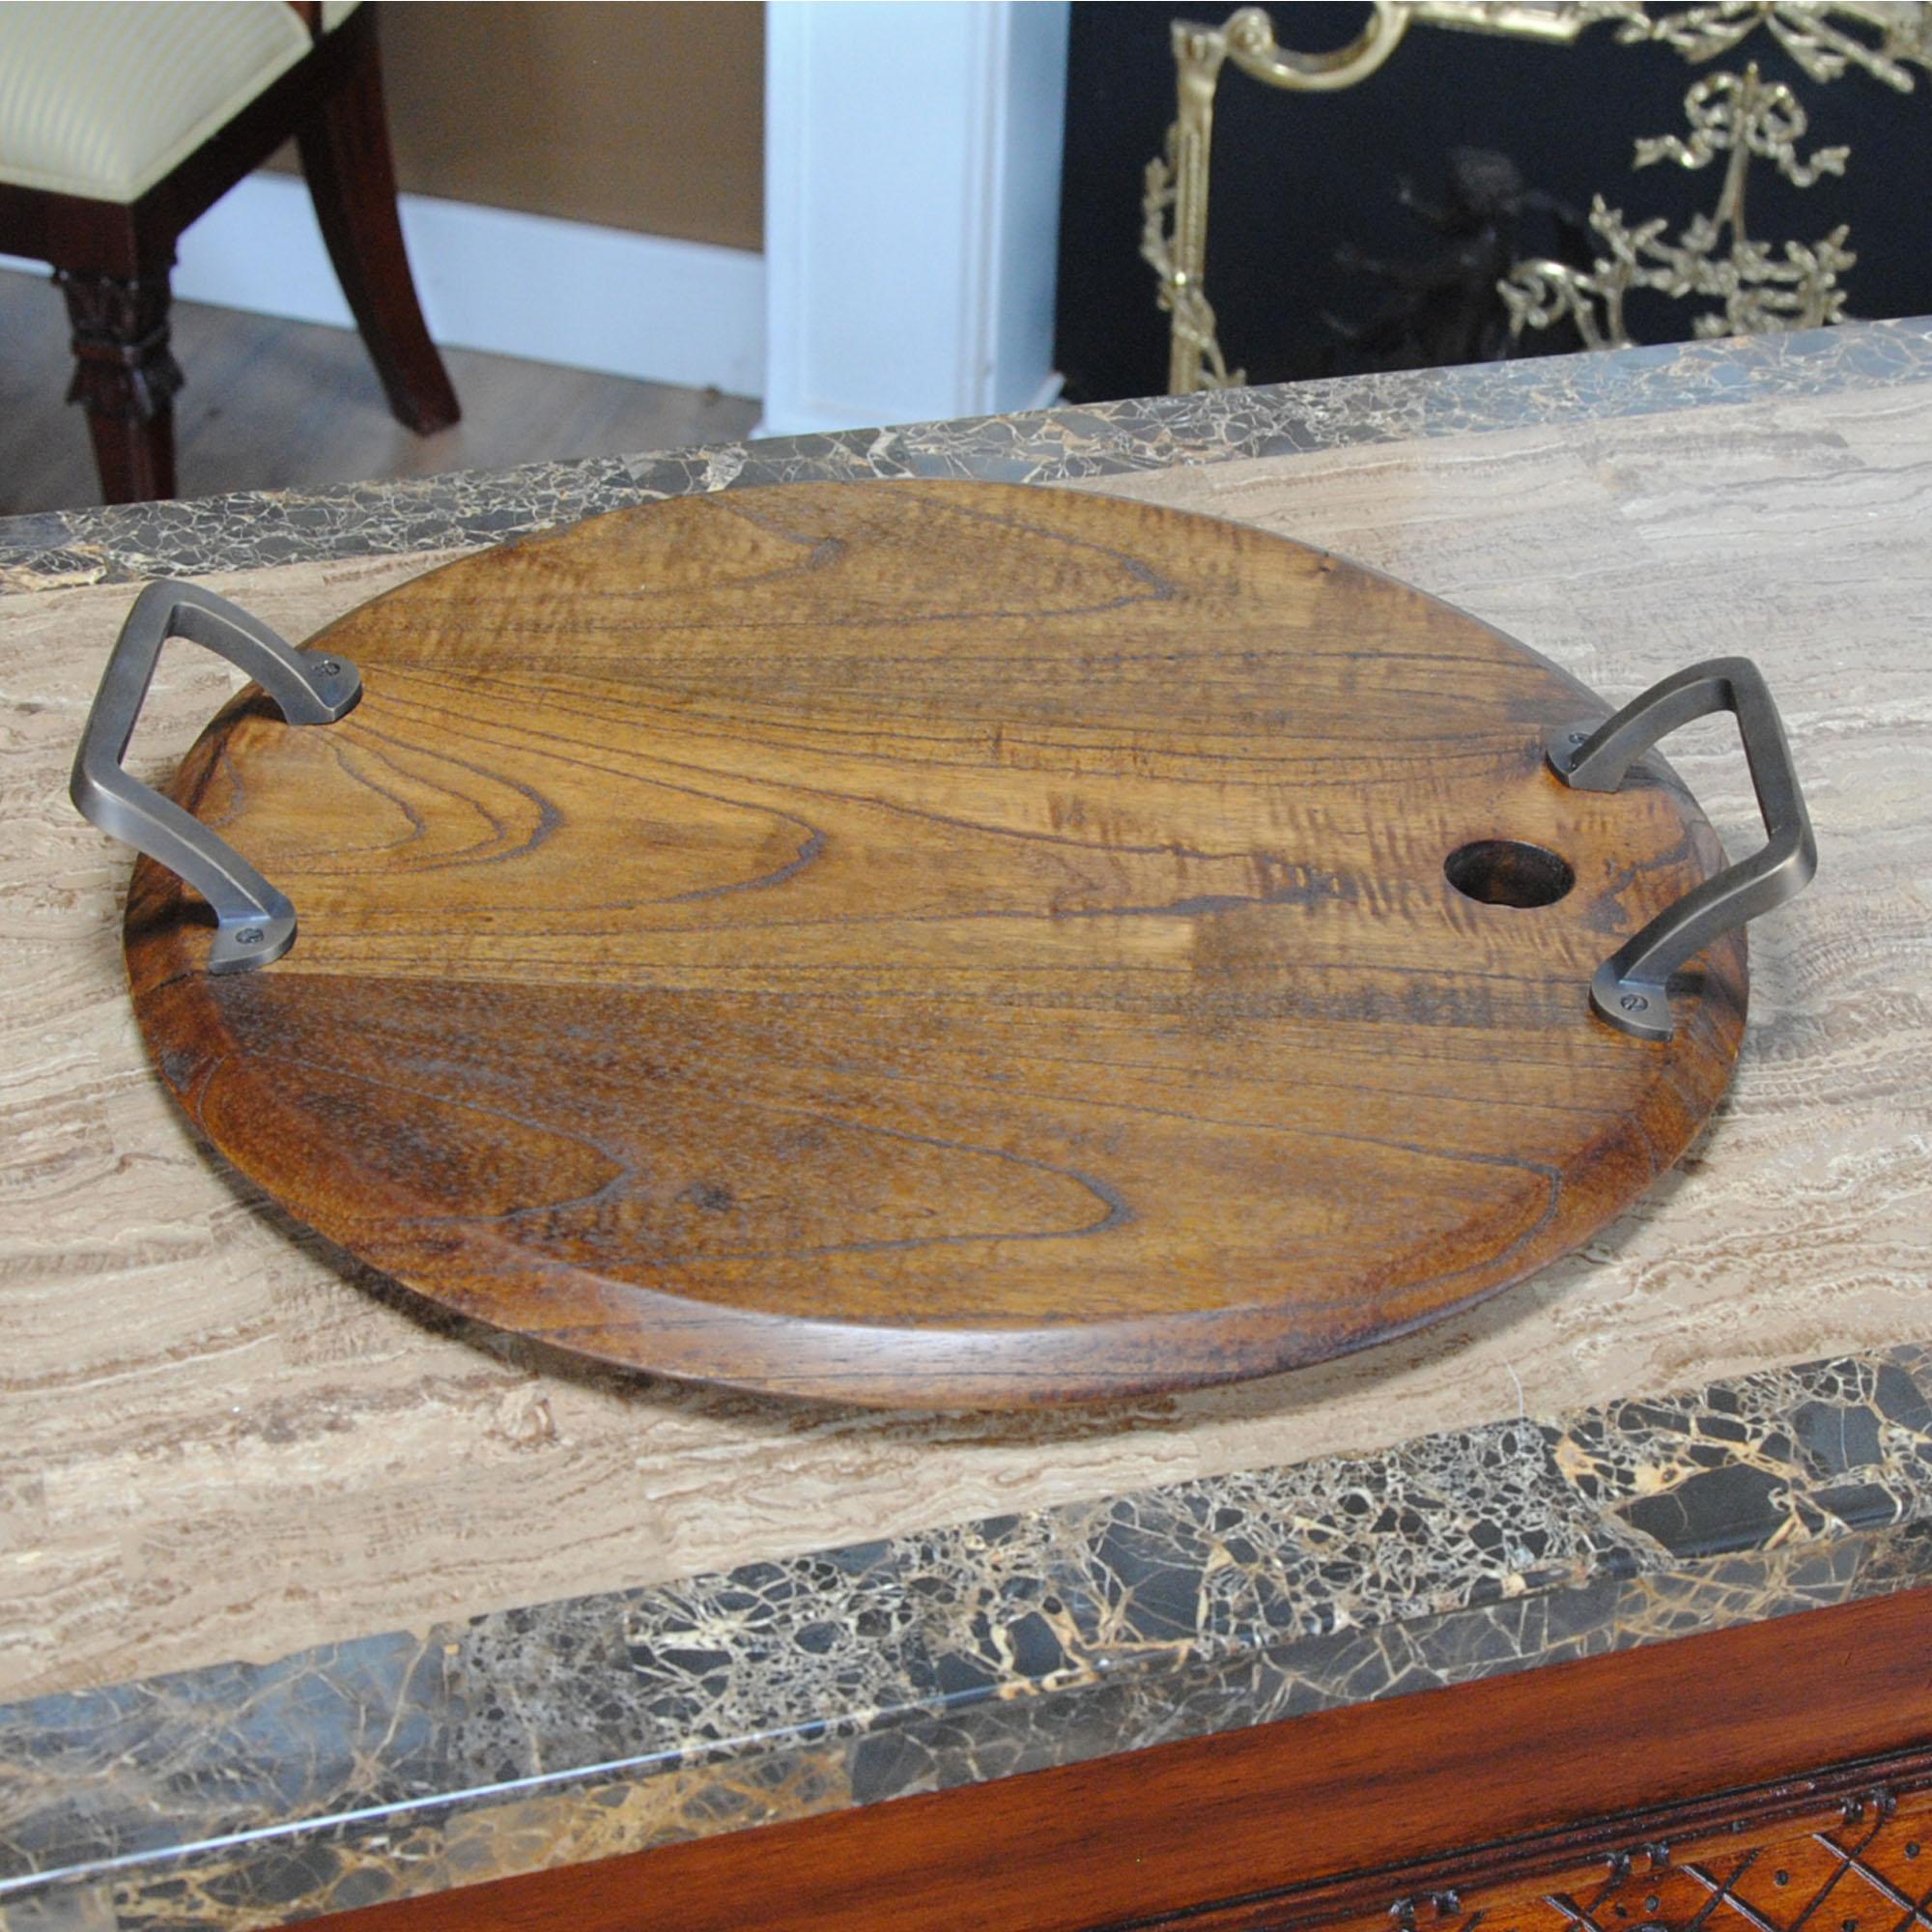 From Niagara Furniture, this Medium Oak Wine Barrel Tray is produced from solid oak and created to resemble the end of a wine barrel.  Using a wooden cutting / serving board provides a very resilient surface while protecting knives from damage. 